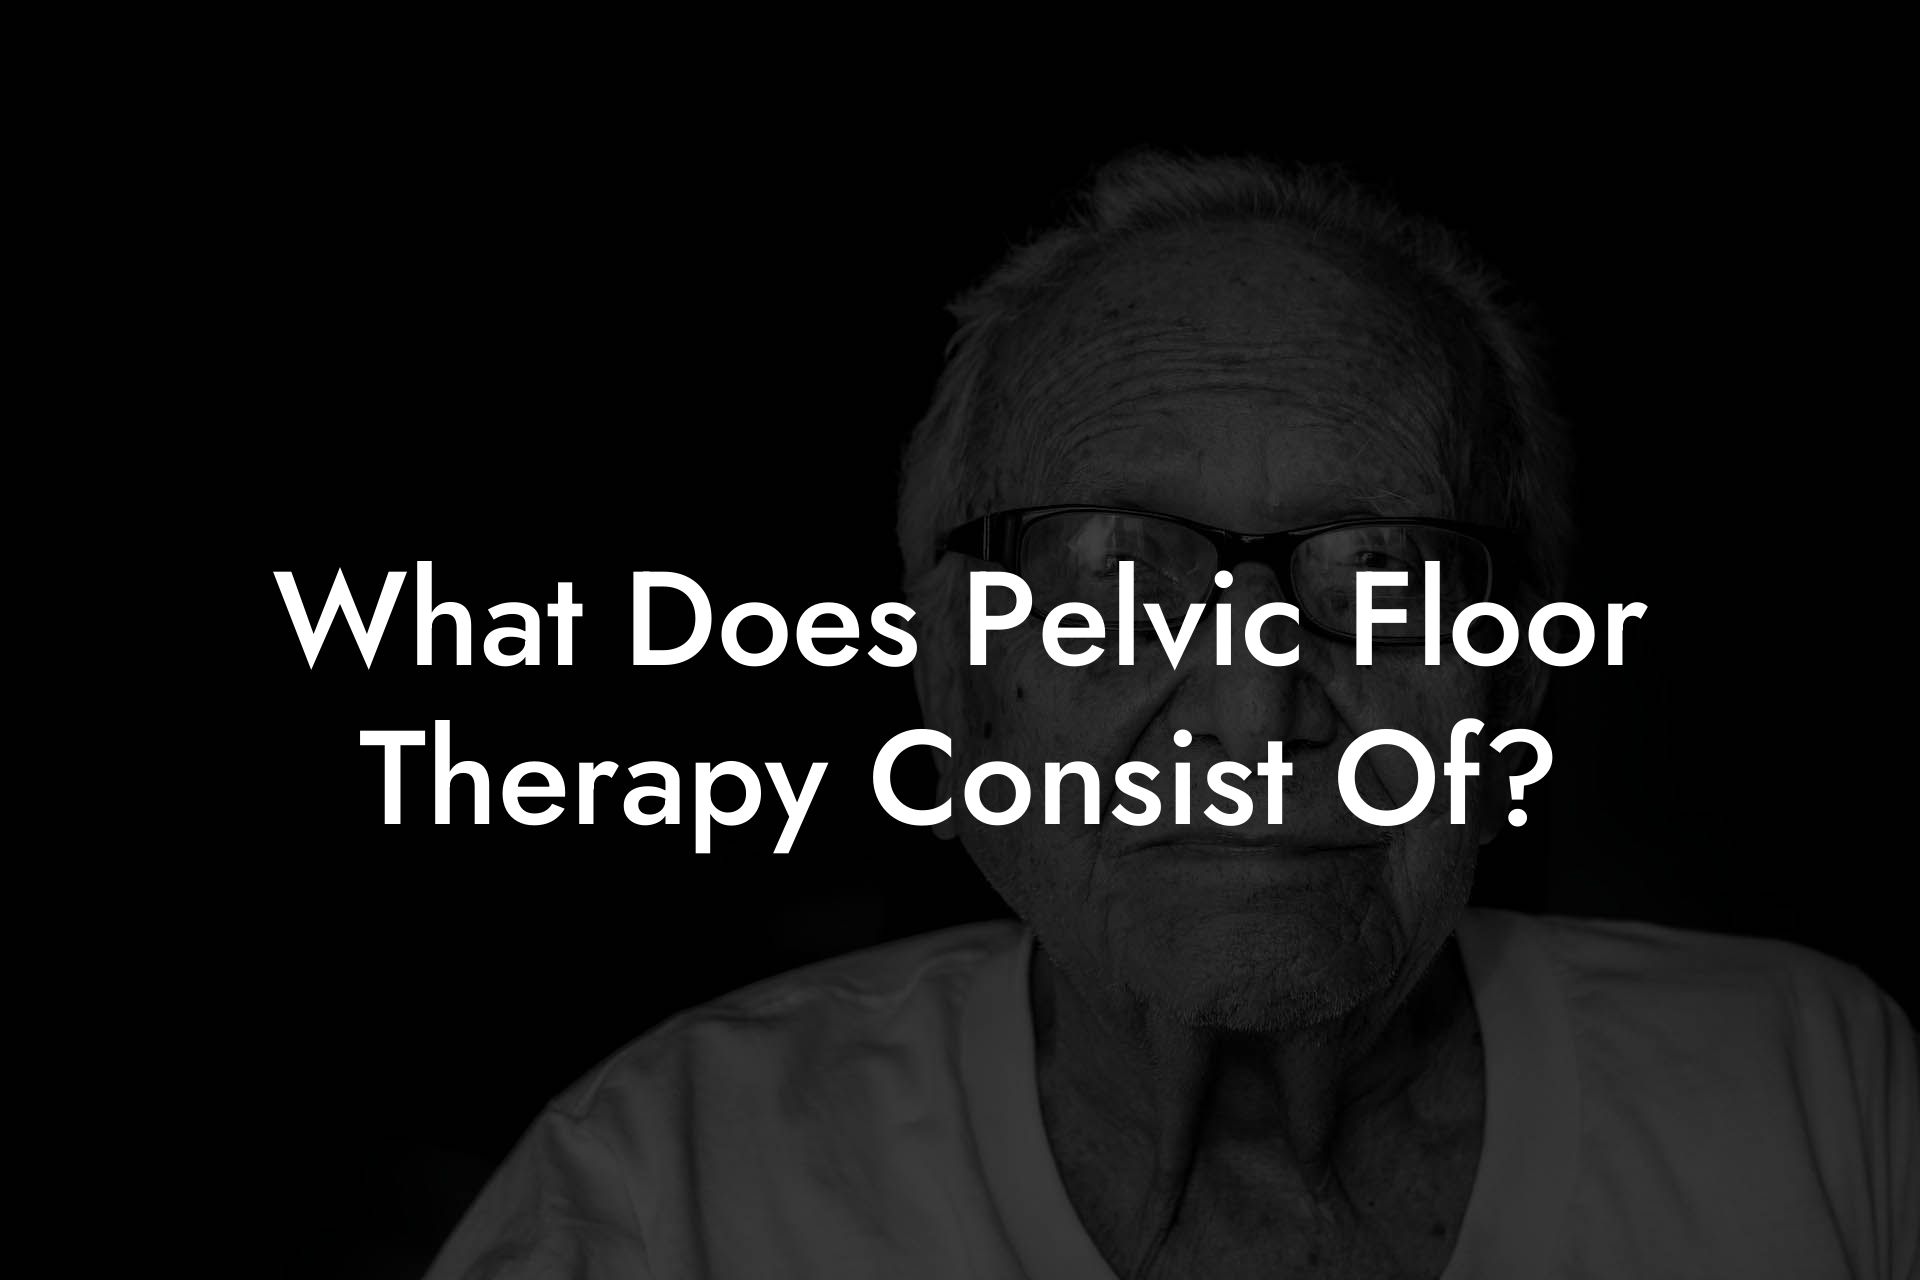 What Does Pelvic Floor Therapy Consist Of?